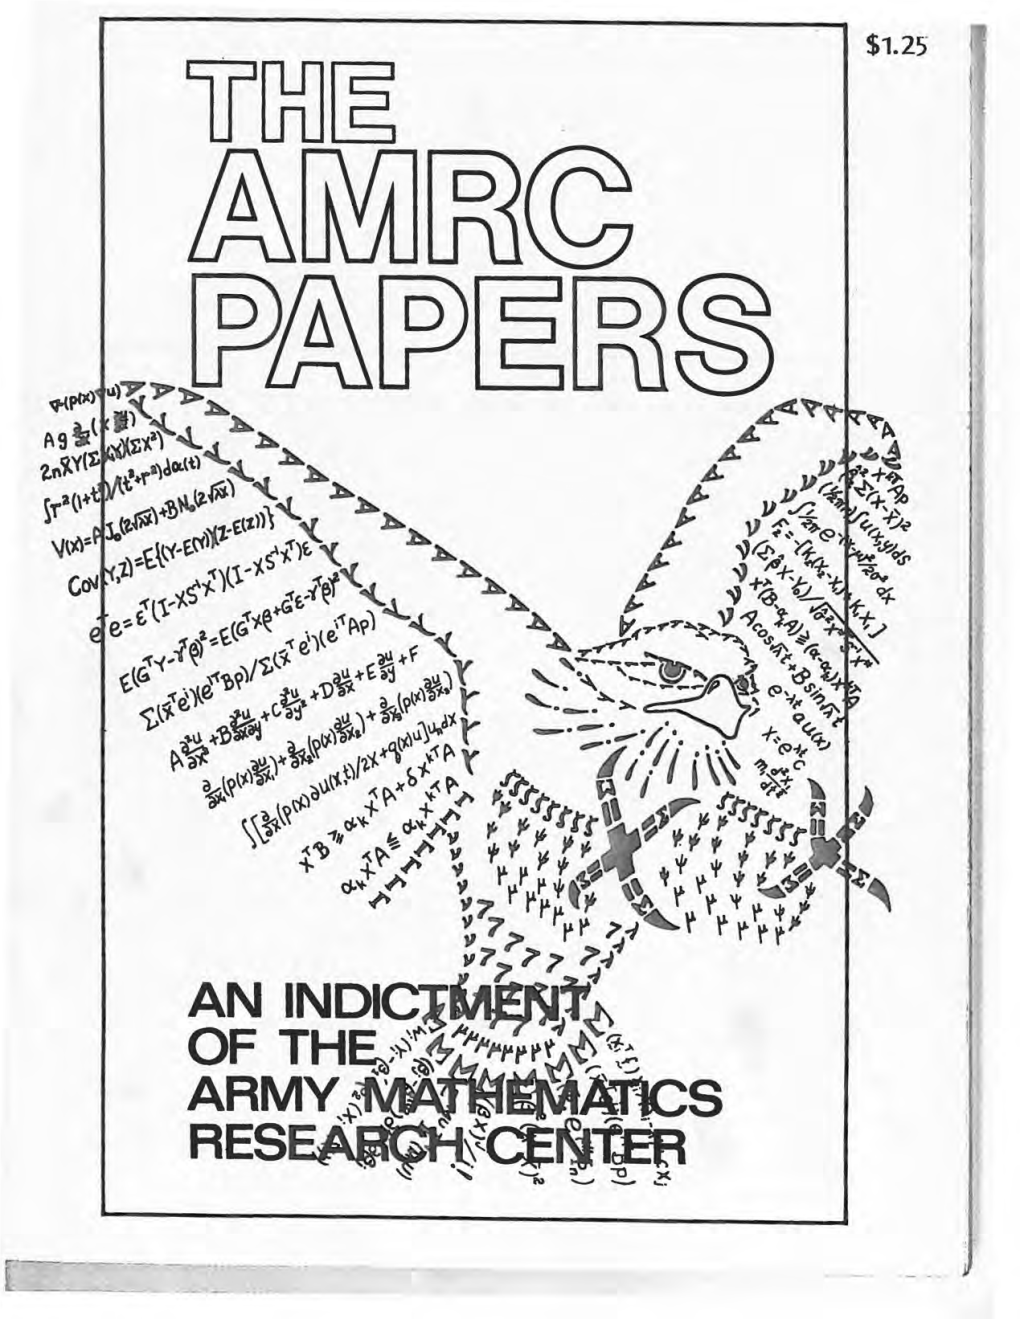 The AMRC Papers